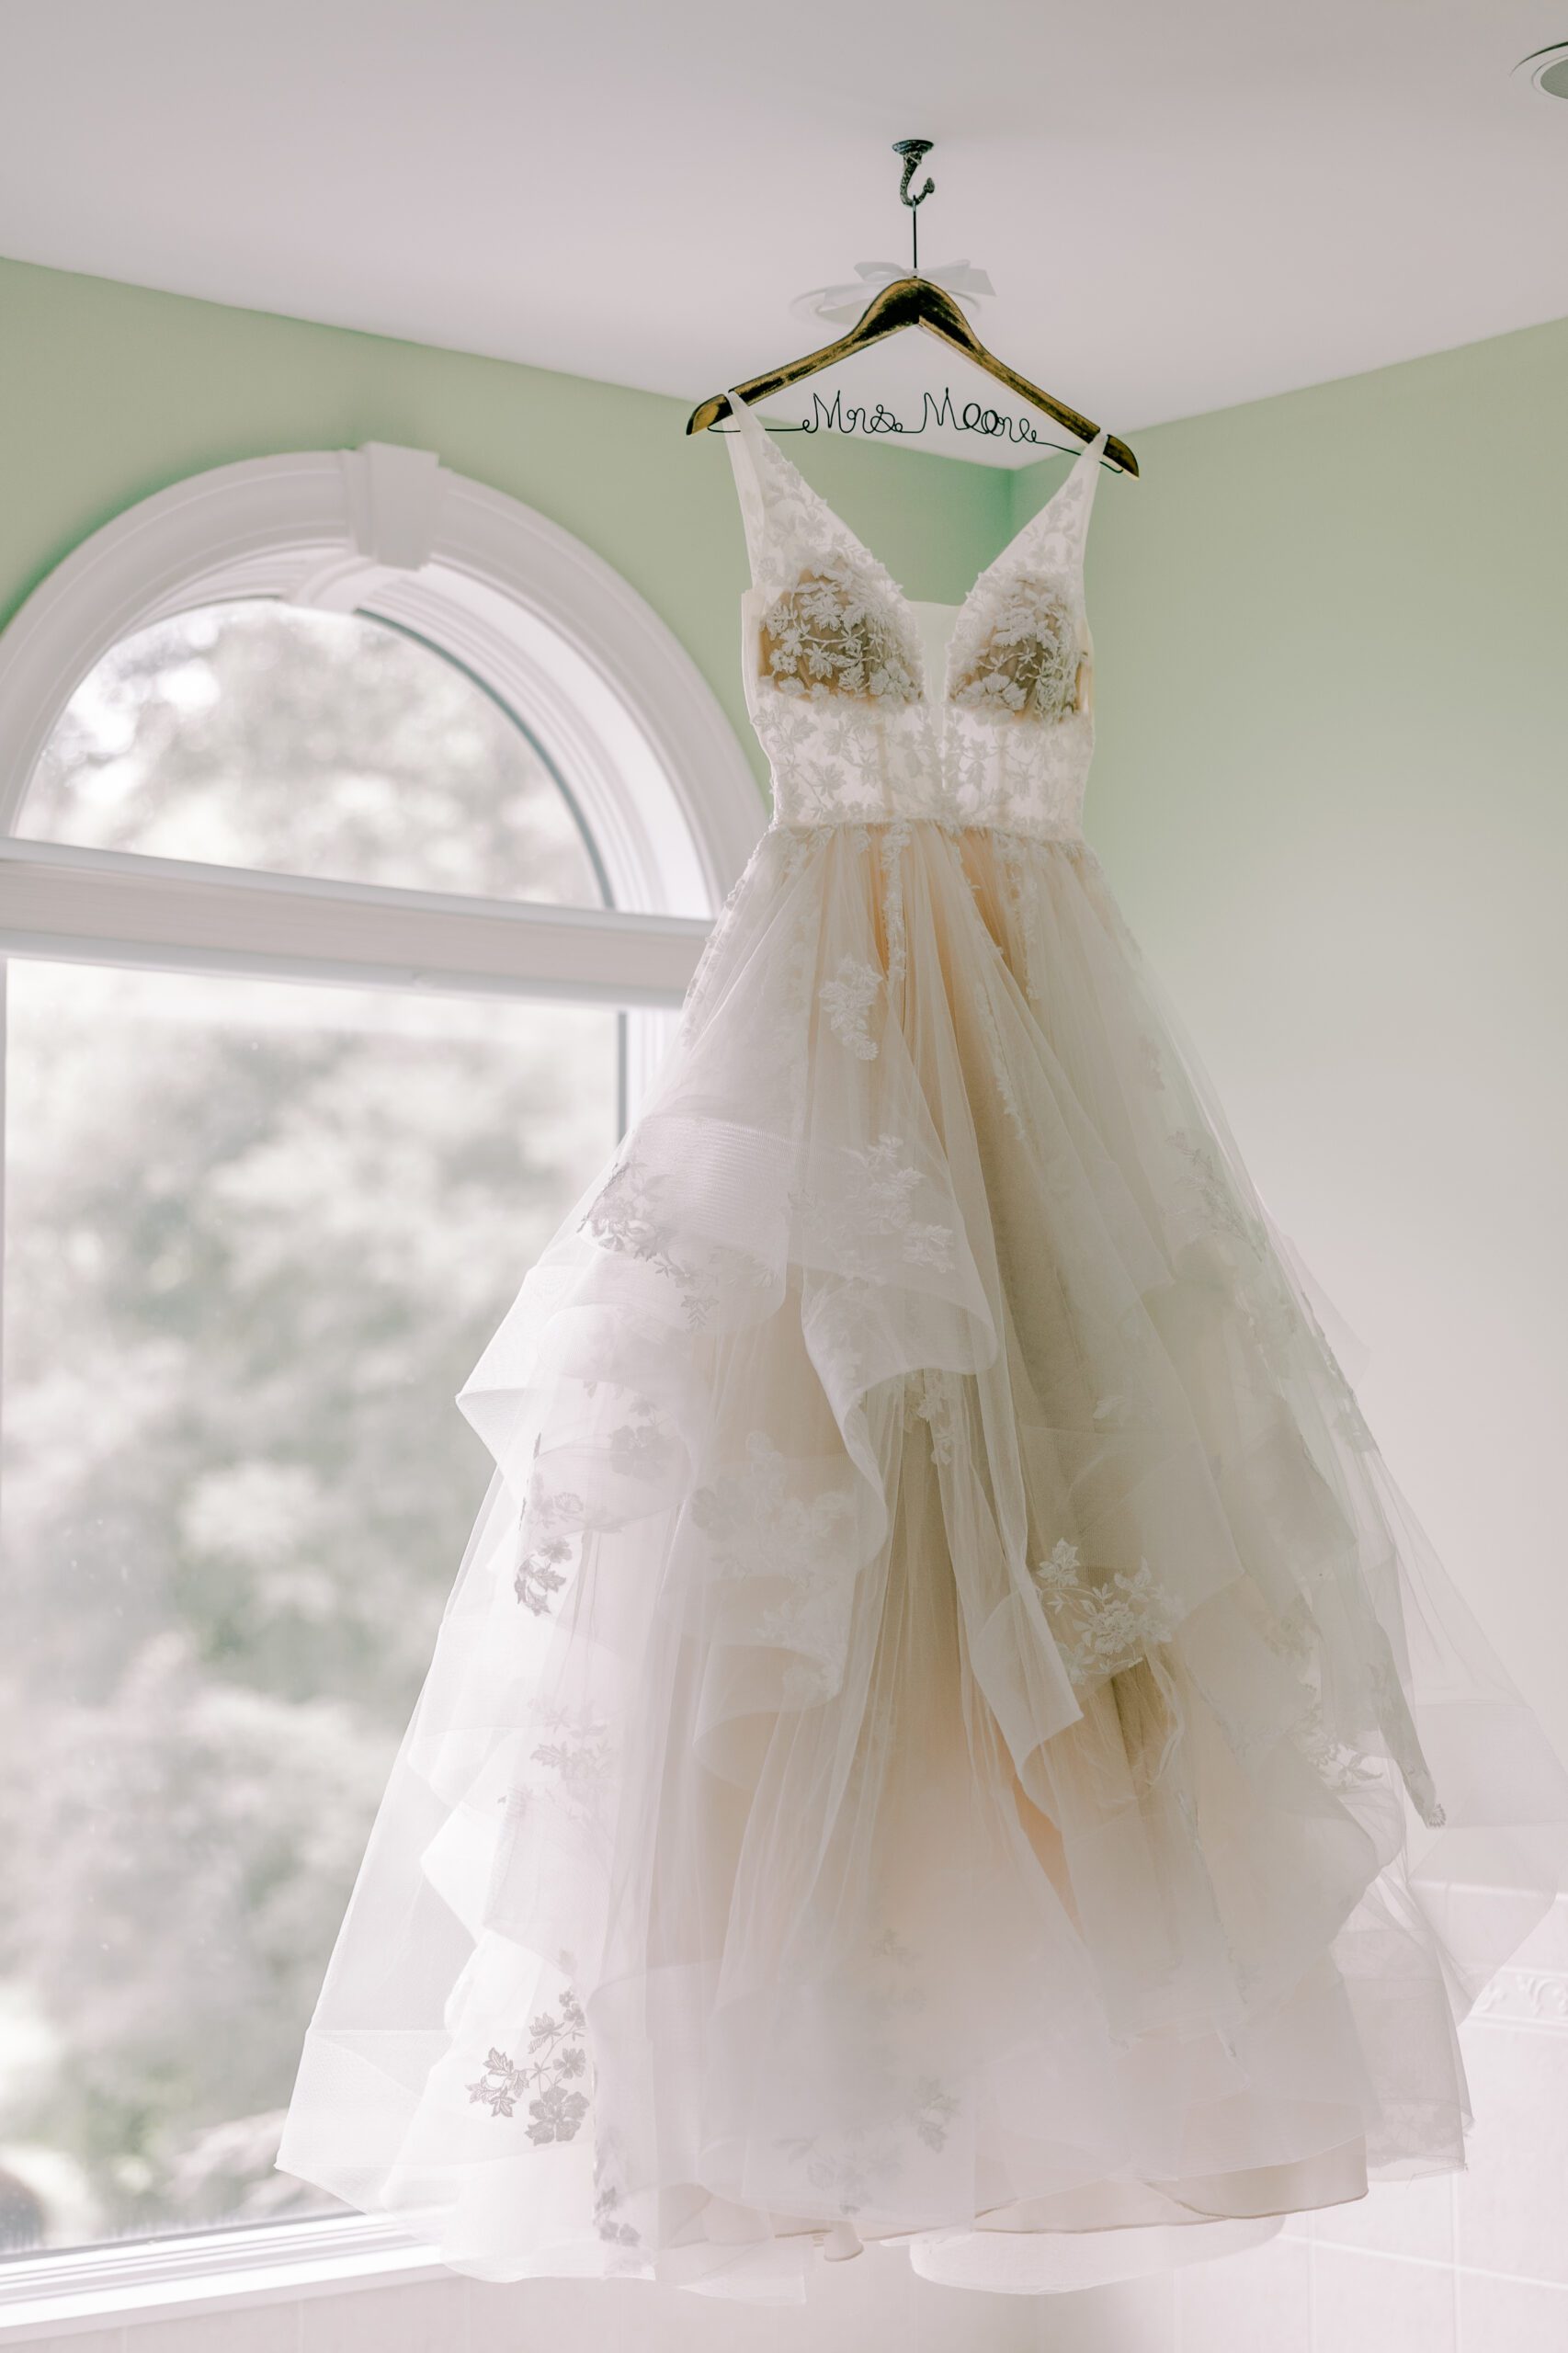 Wedding dress hanging from ceiling in front of a window at irvine estate